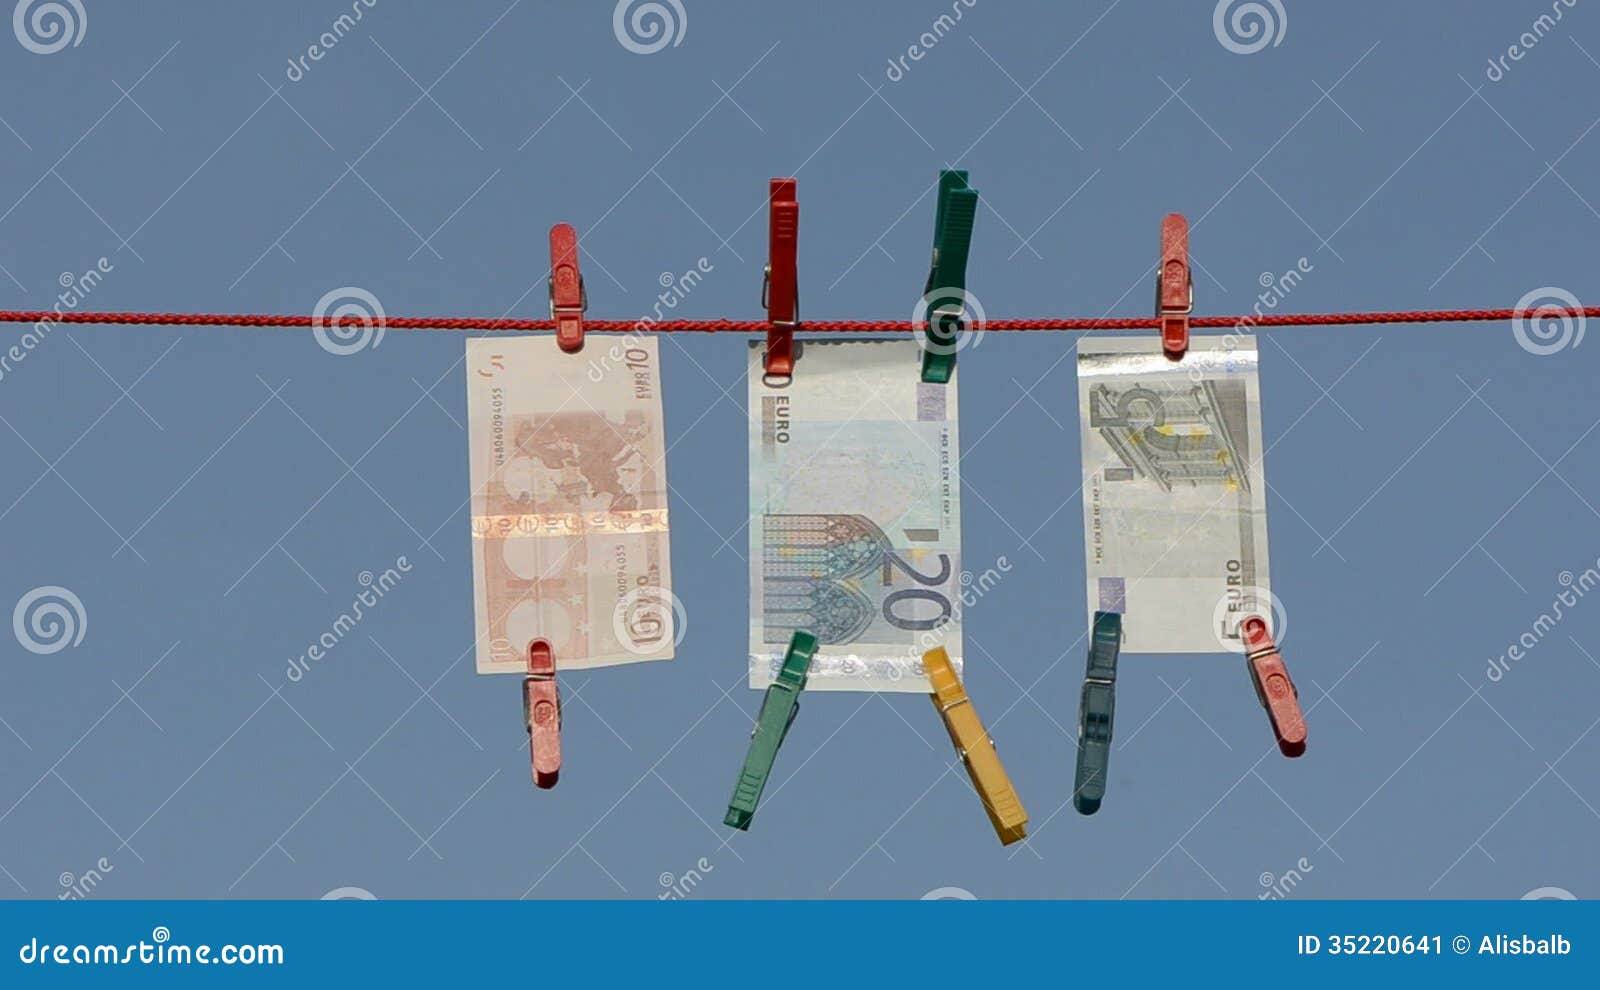 https://thumbs.dreamstime.com/z/currency-euro-clothes-line-money-laundering-string-35220641.jpg